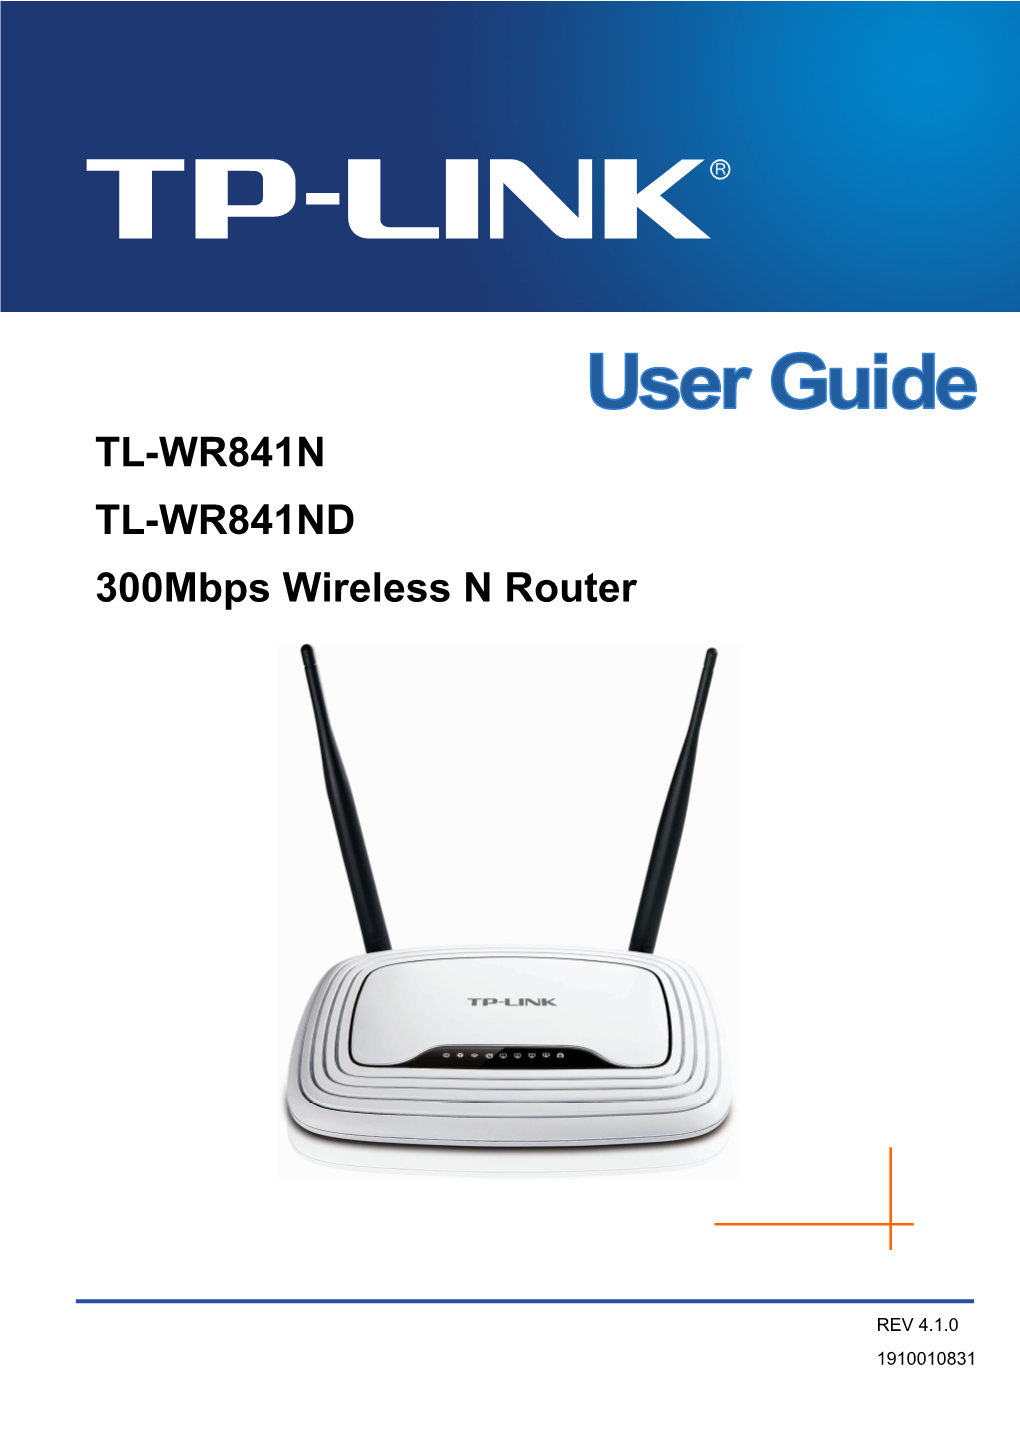 TL-WR841N TL-WR841ND 300Mbps Wireless N Router